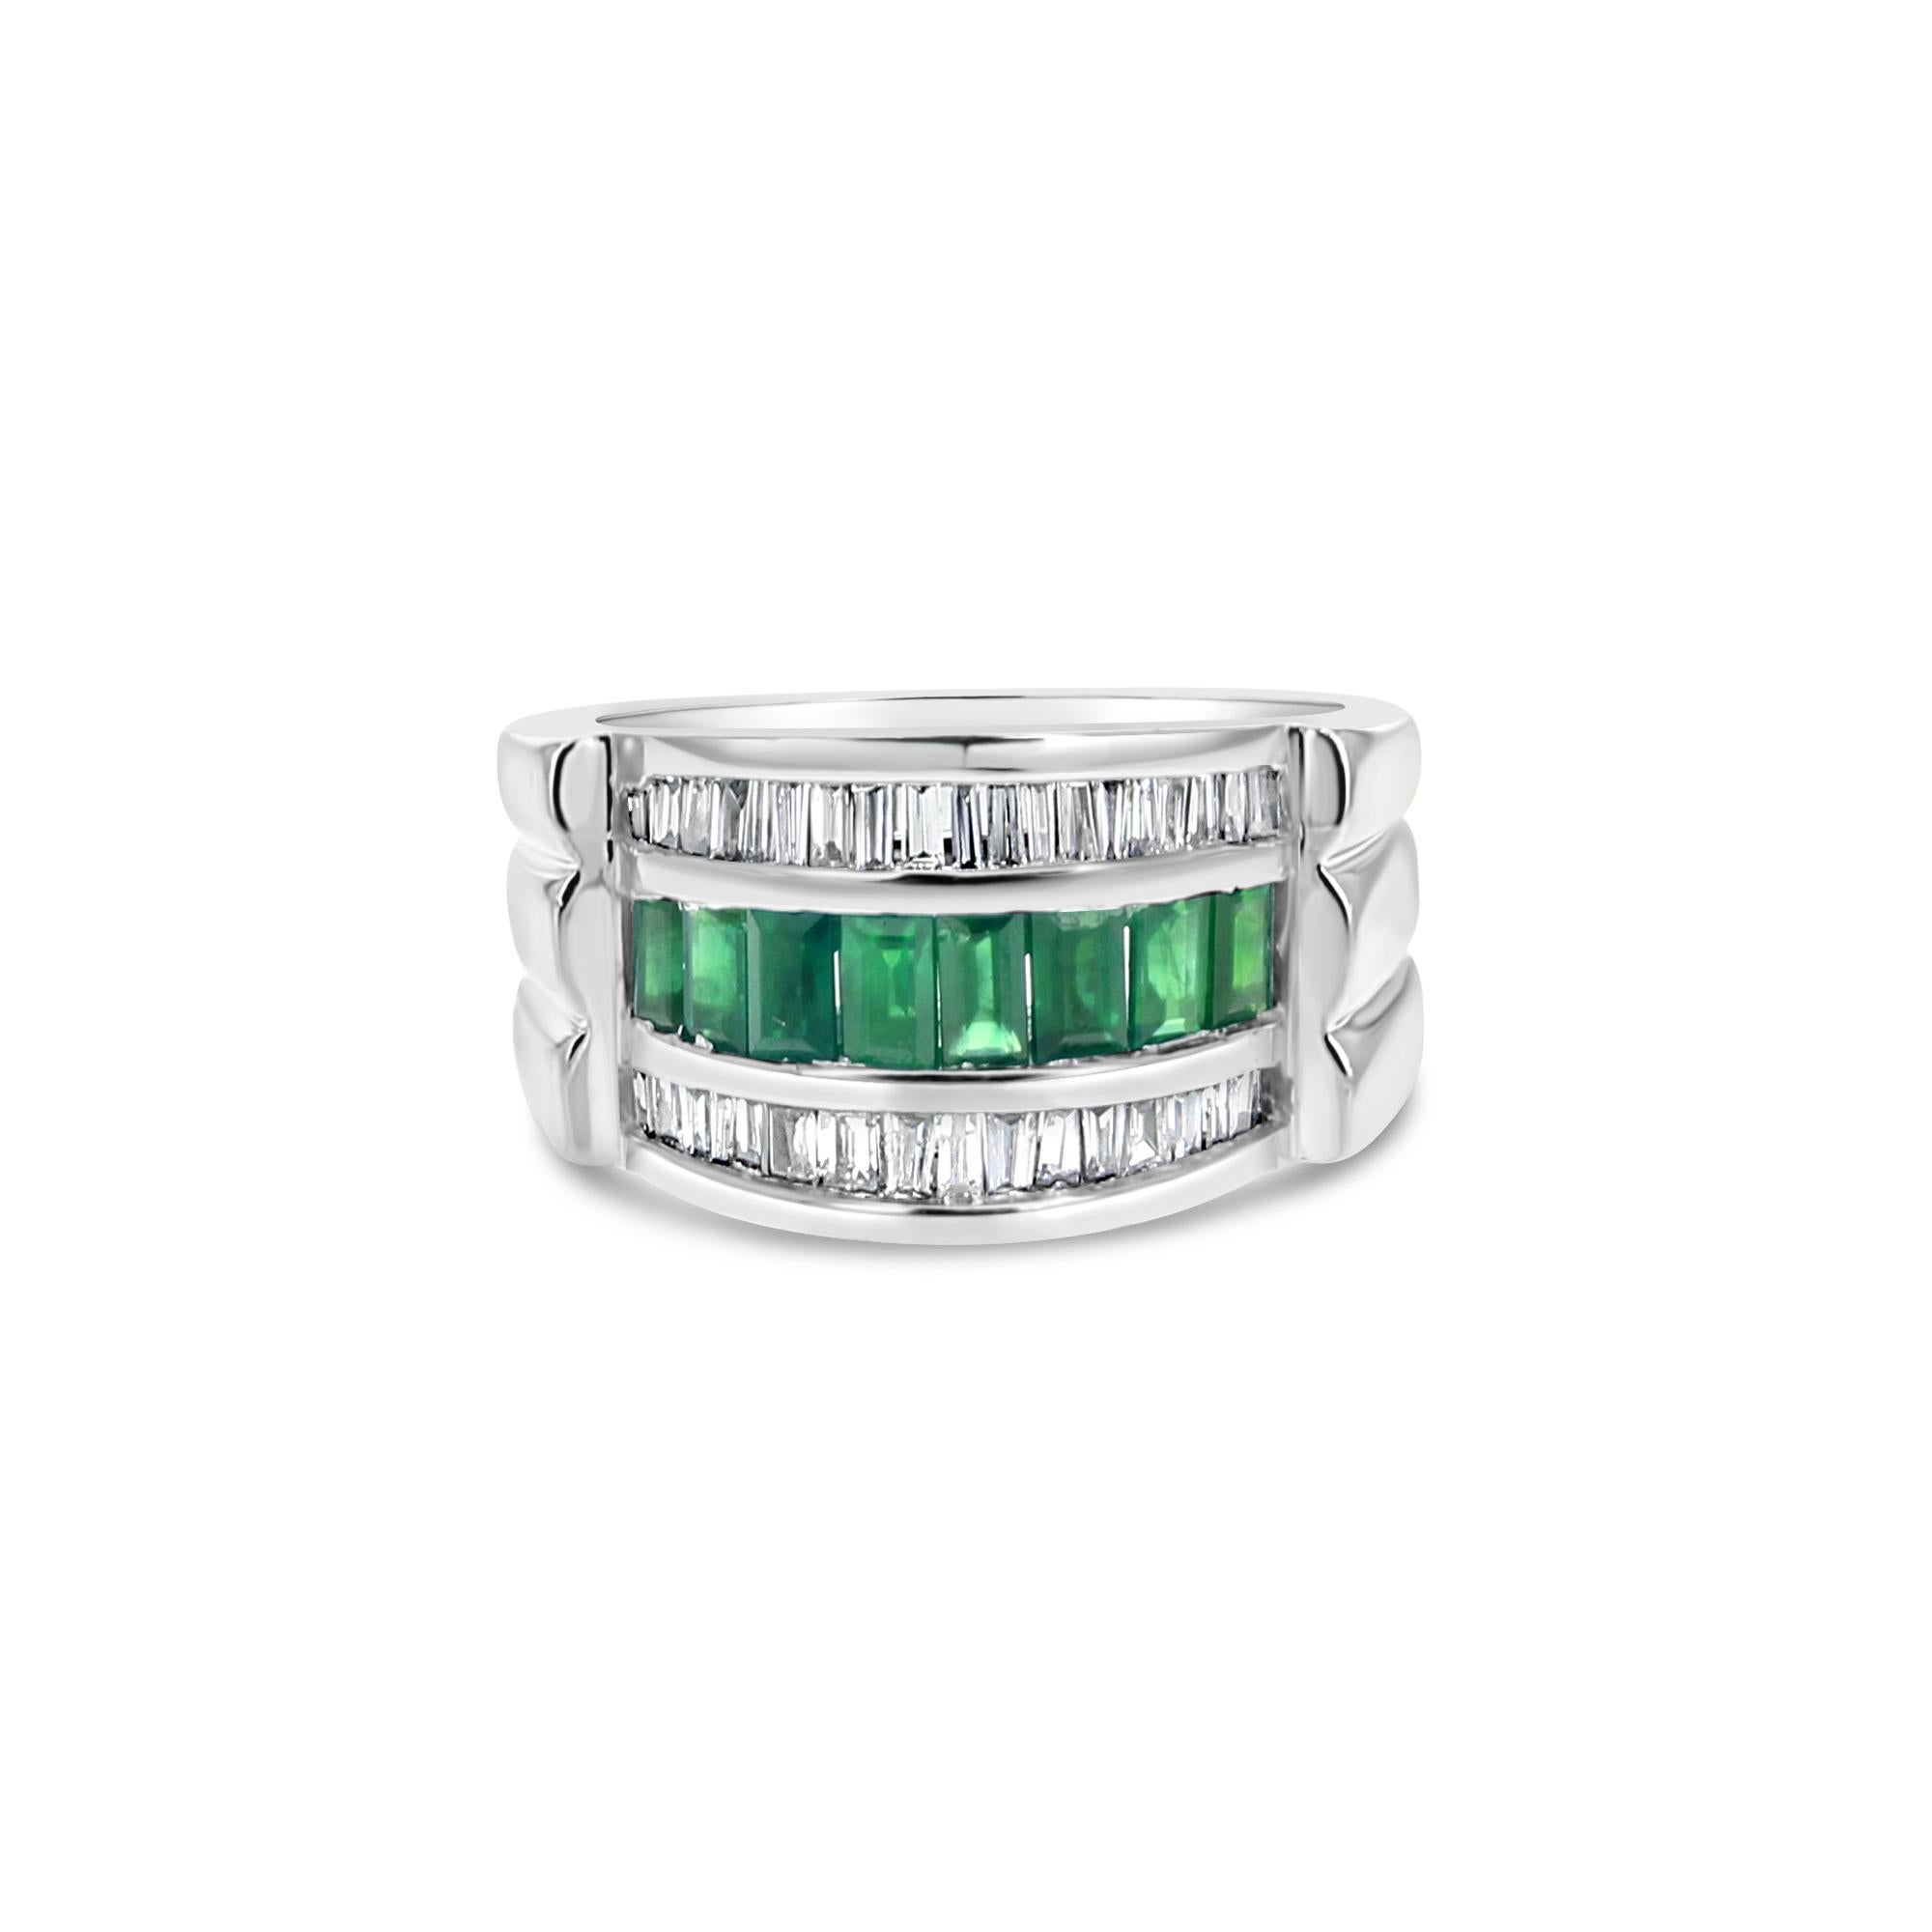 2 Carat Emerald Diamond Baguette Cocktail Ring 14k White Gold In New Condition For Sale In Sugar Land, TX